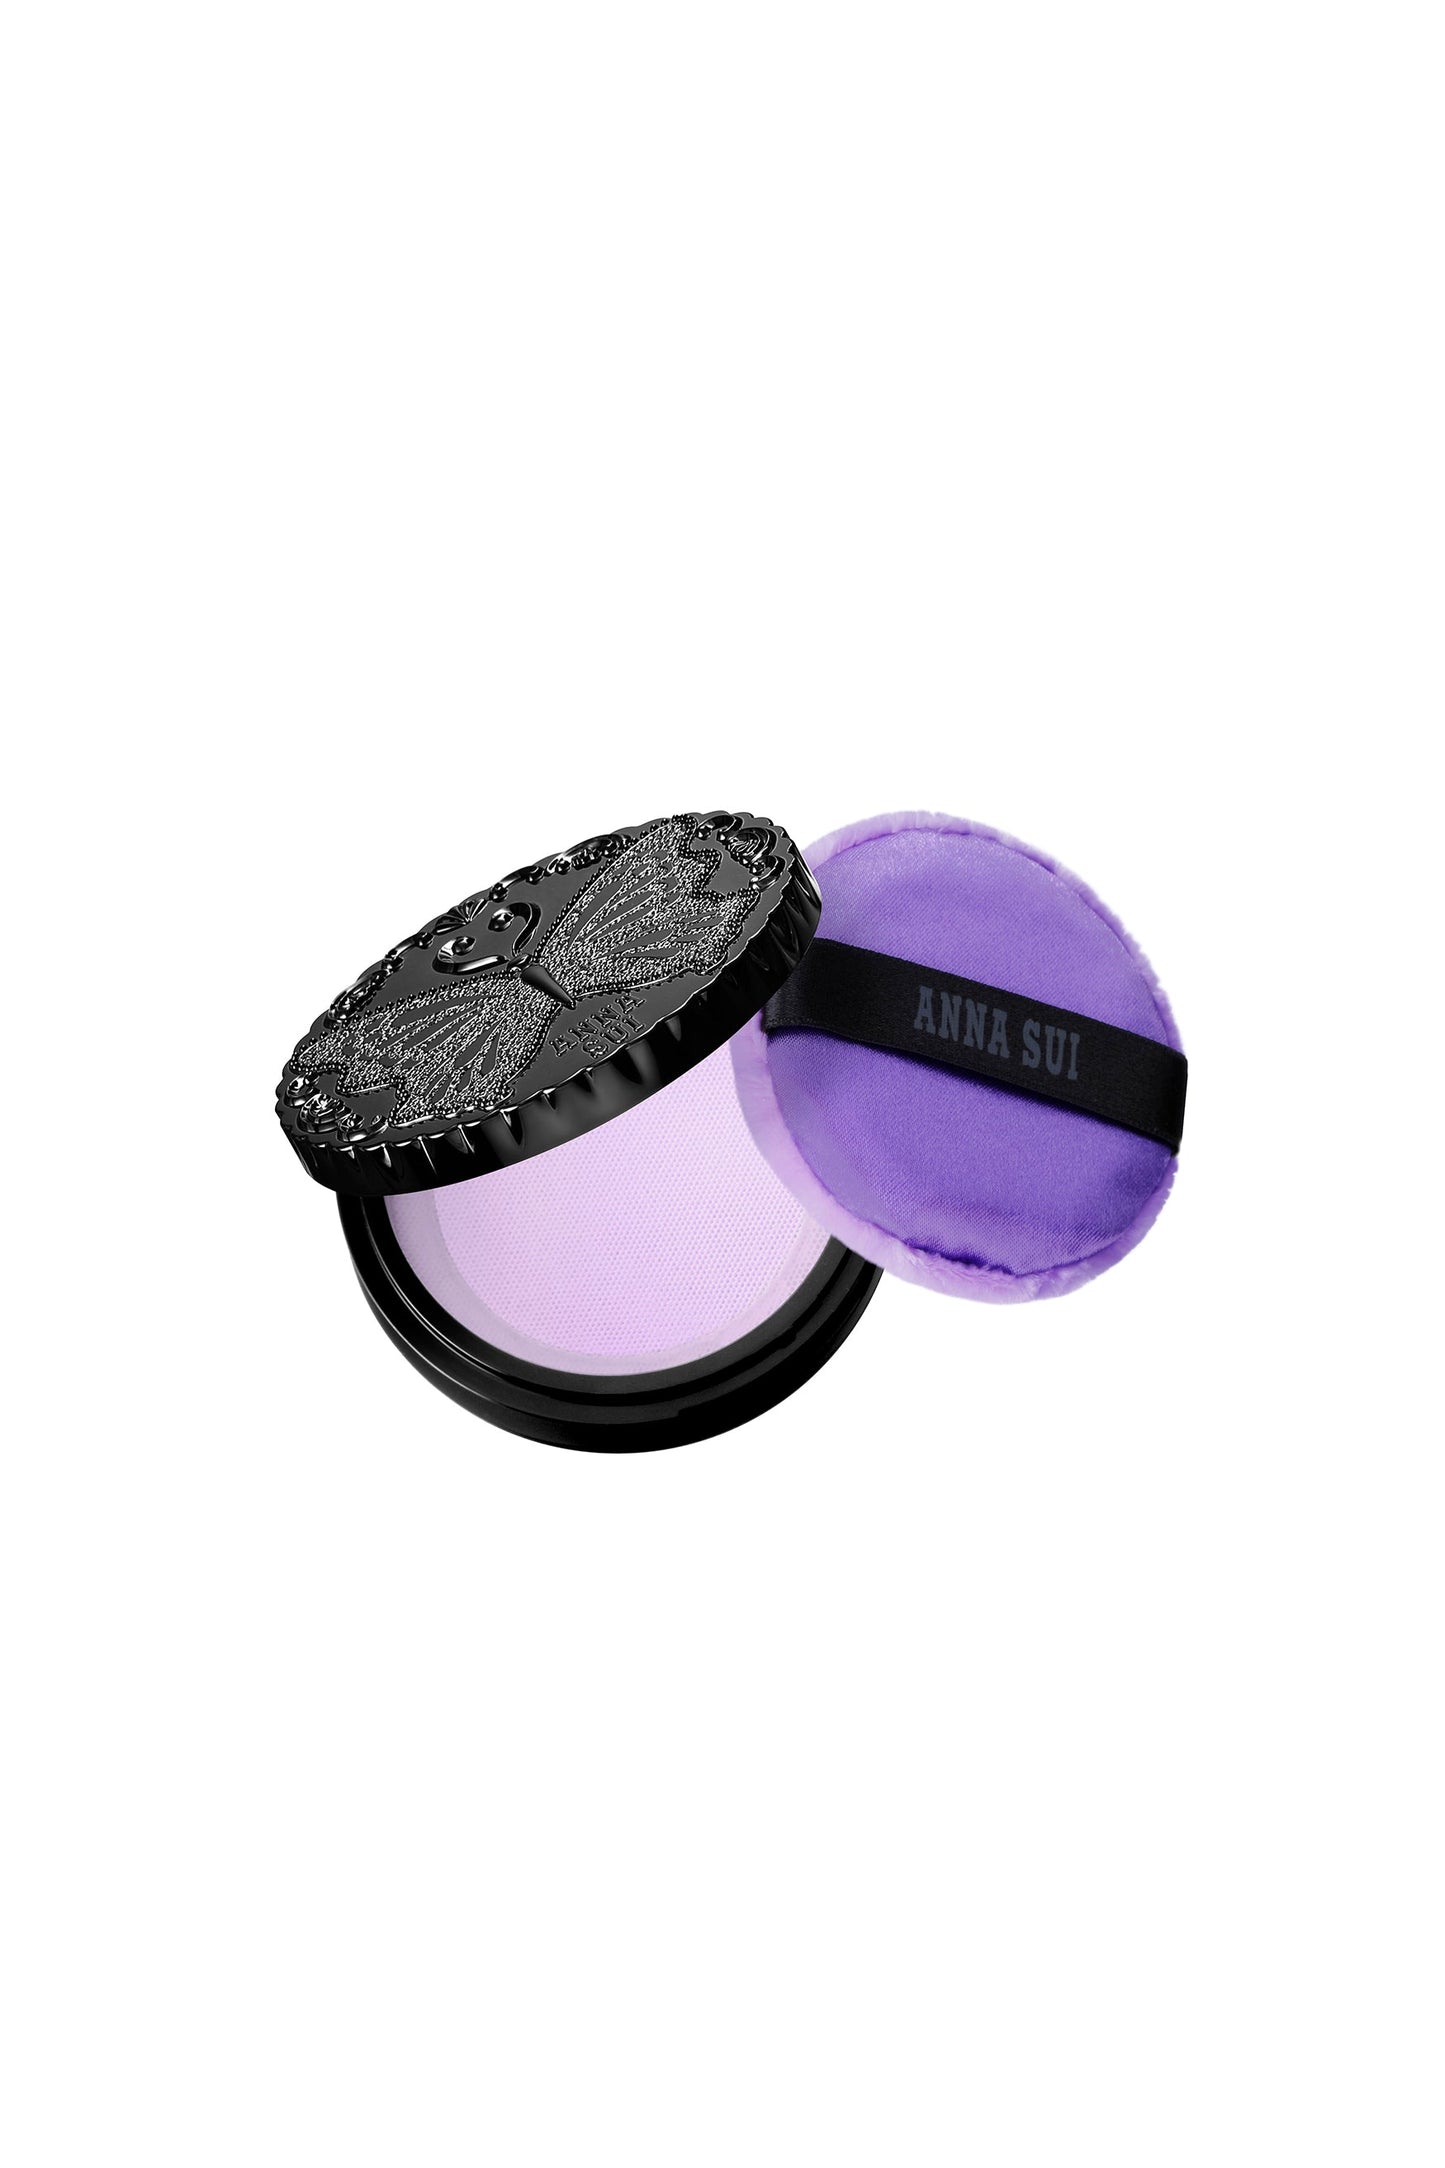 Classic Loose Powder black round box with a butterfly engrave on top, 200: powder, and sponge